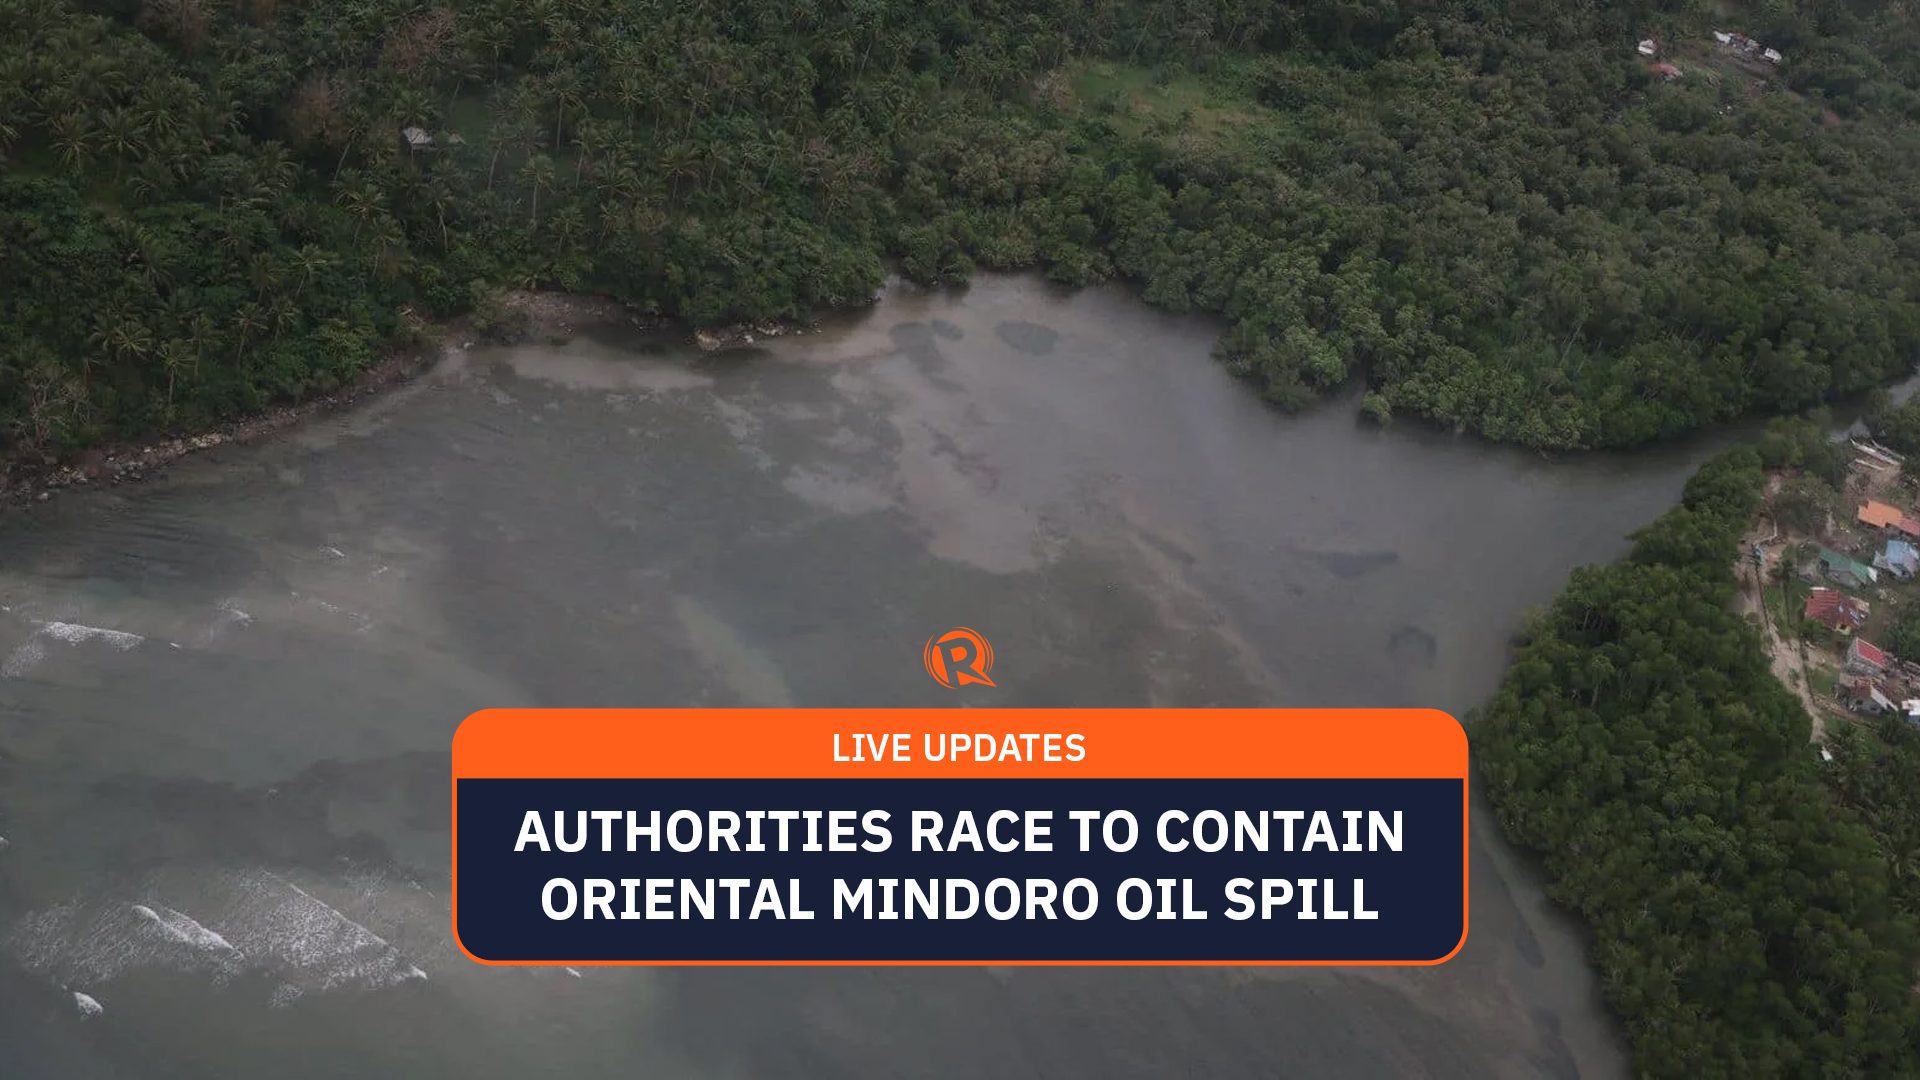 HIGHLIGHTS: Authorities race to contain Oriental Mindoro oil spill